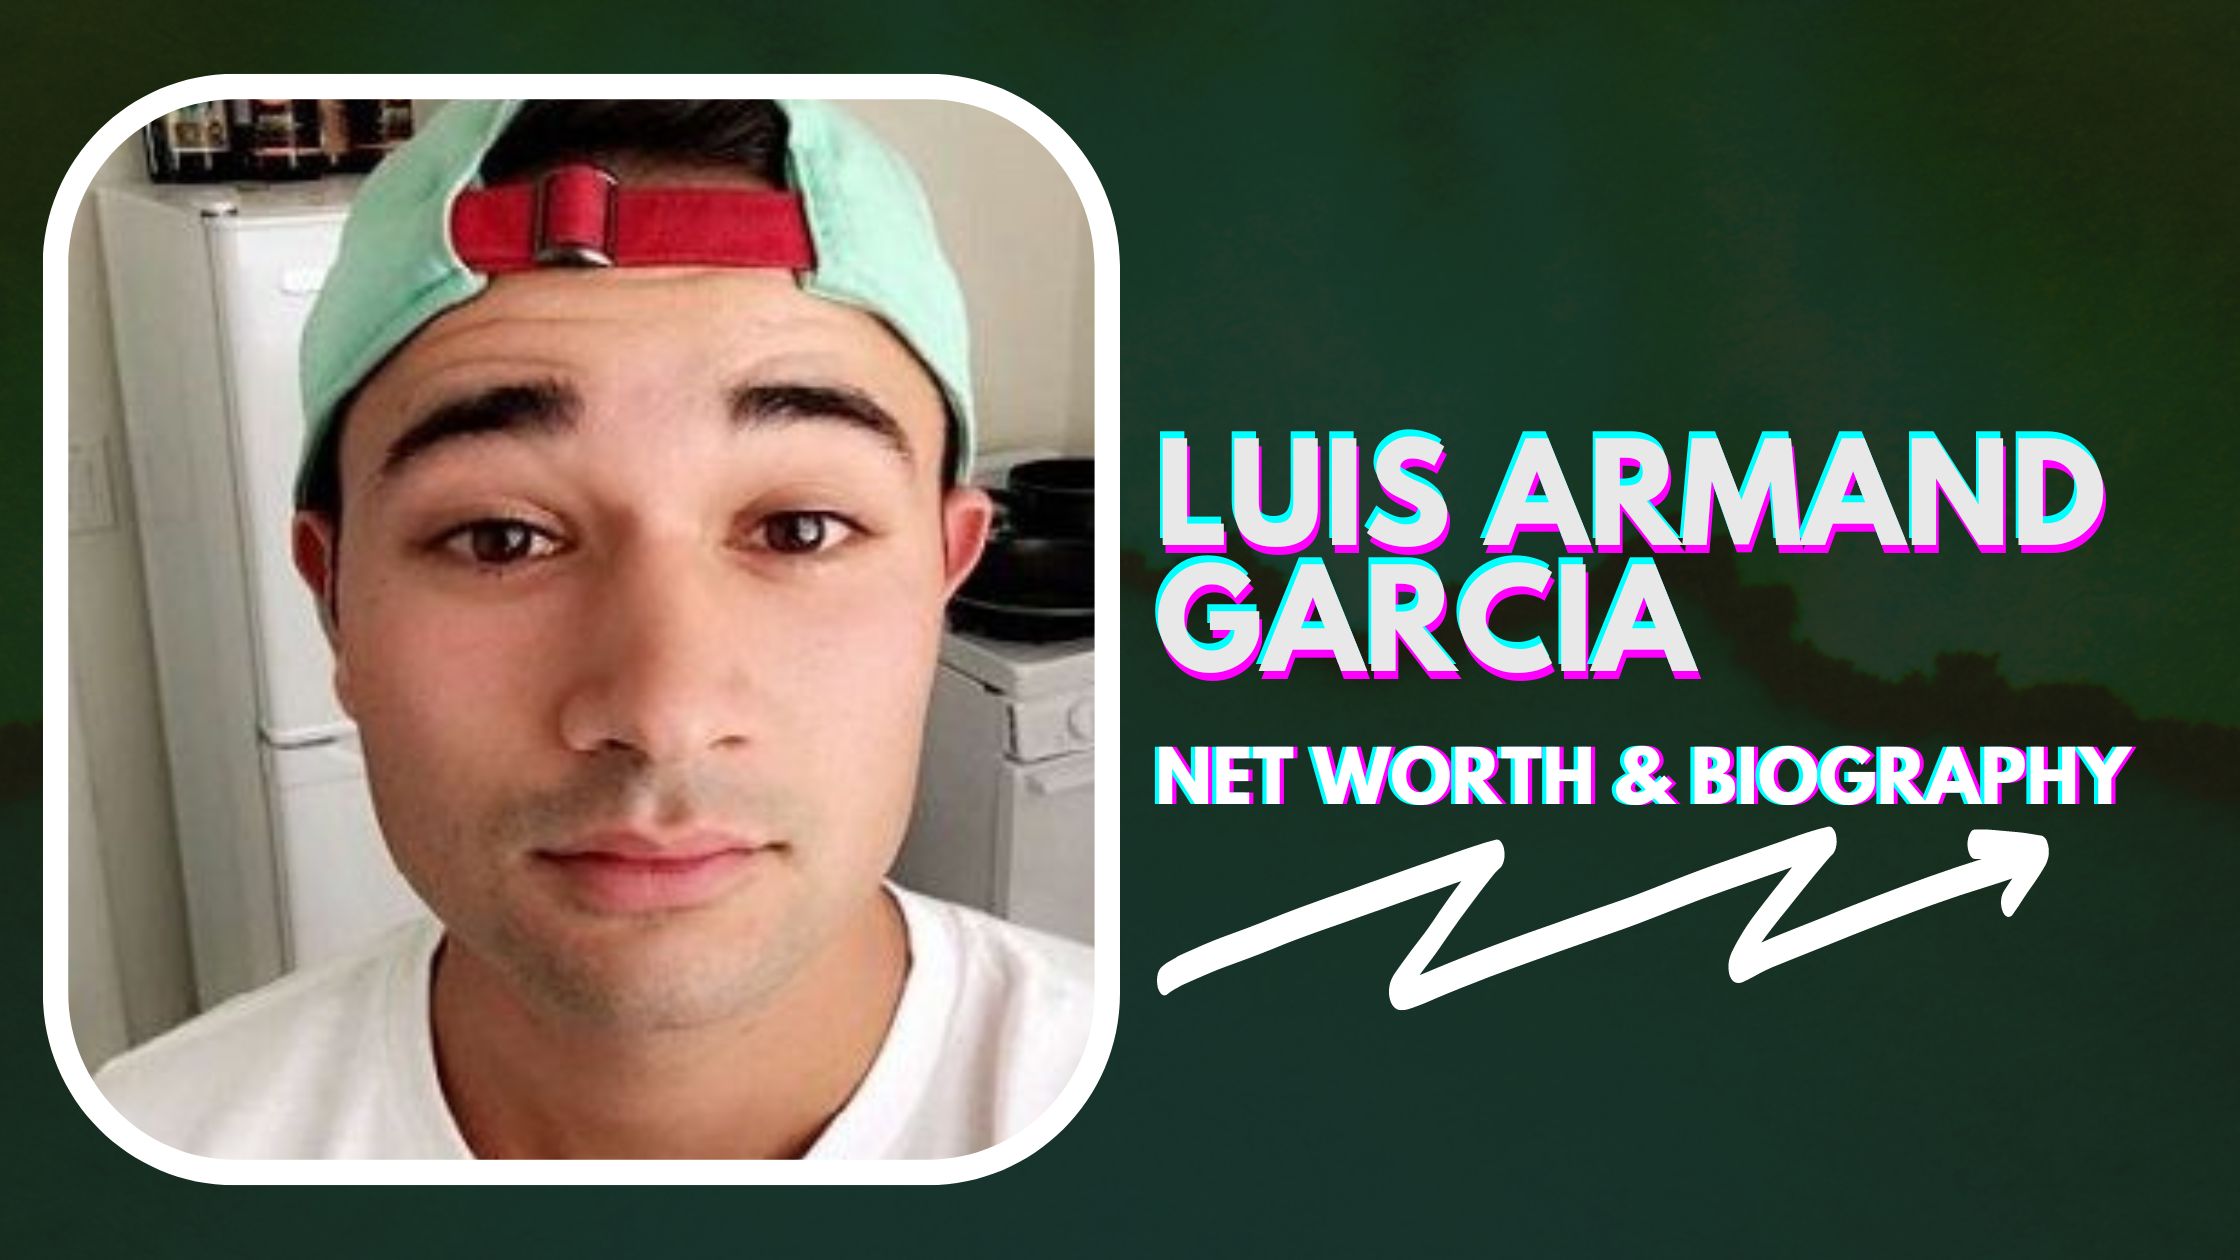 Luis Armand Garcia Biography, Net Worth and Career